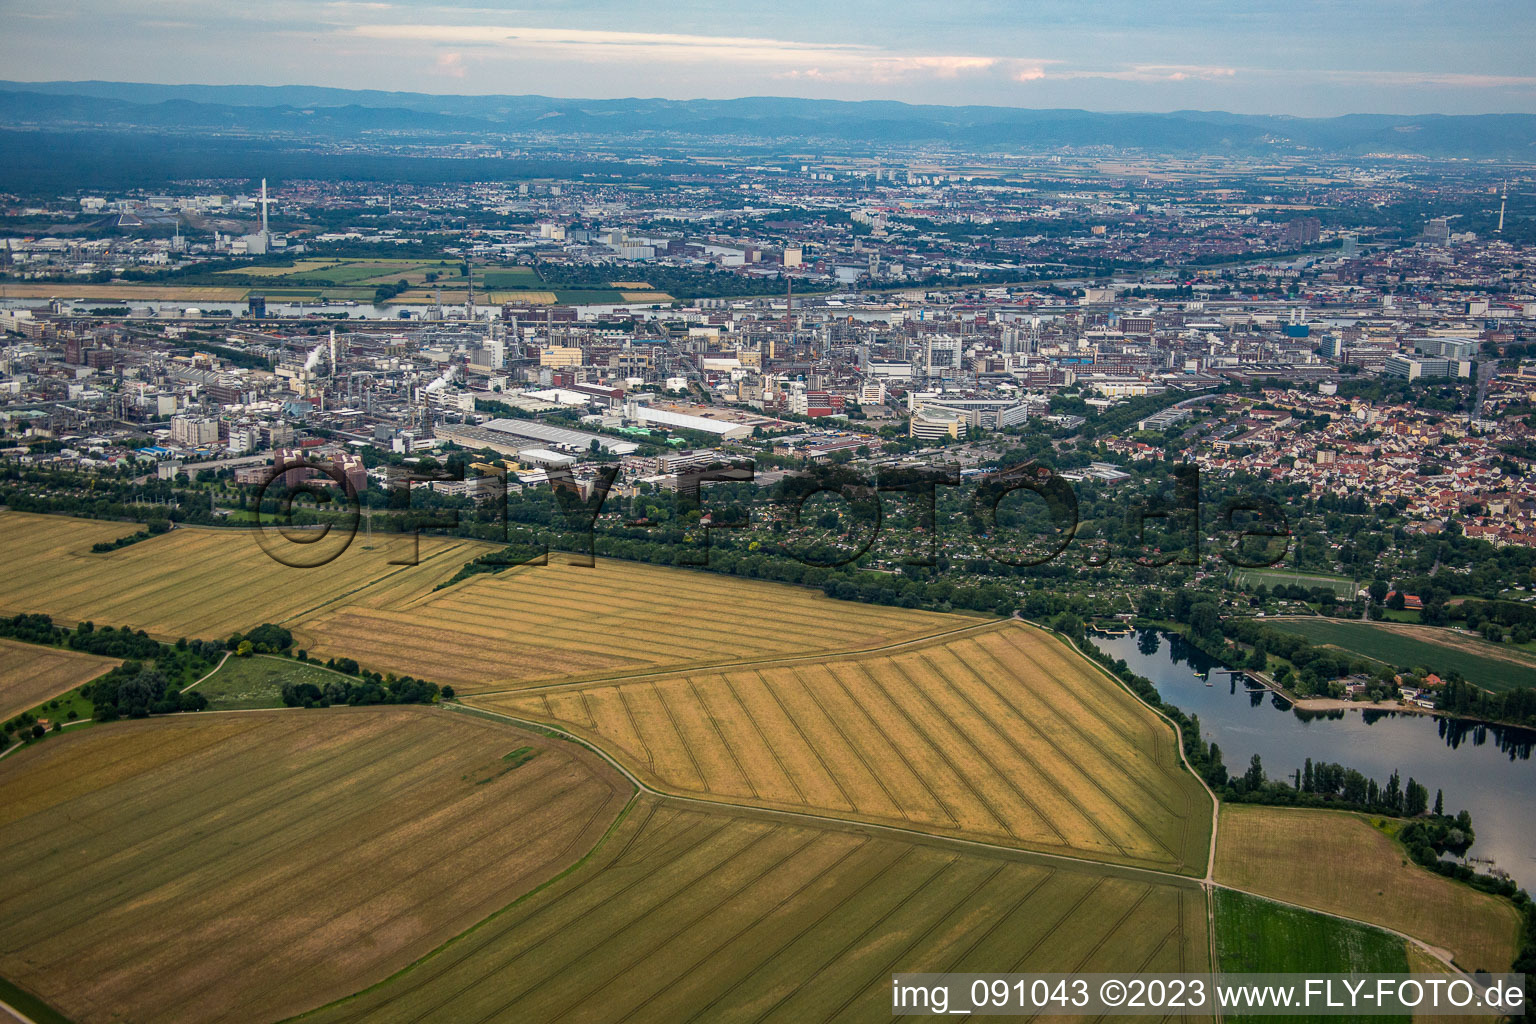 Aerial view of BASF from the west in the district Friesenheim in Ludwigshafen am Rhein in the state Rhineland-Palatinate, Germany